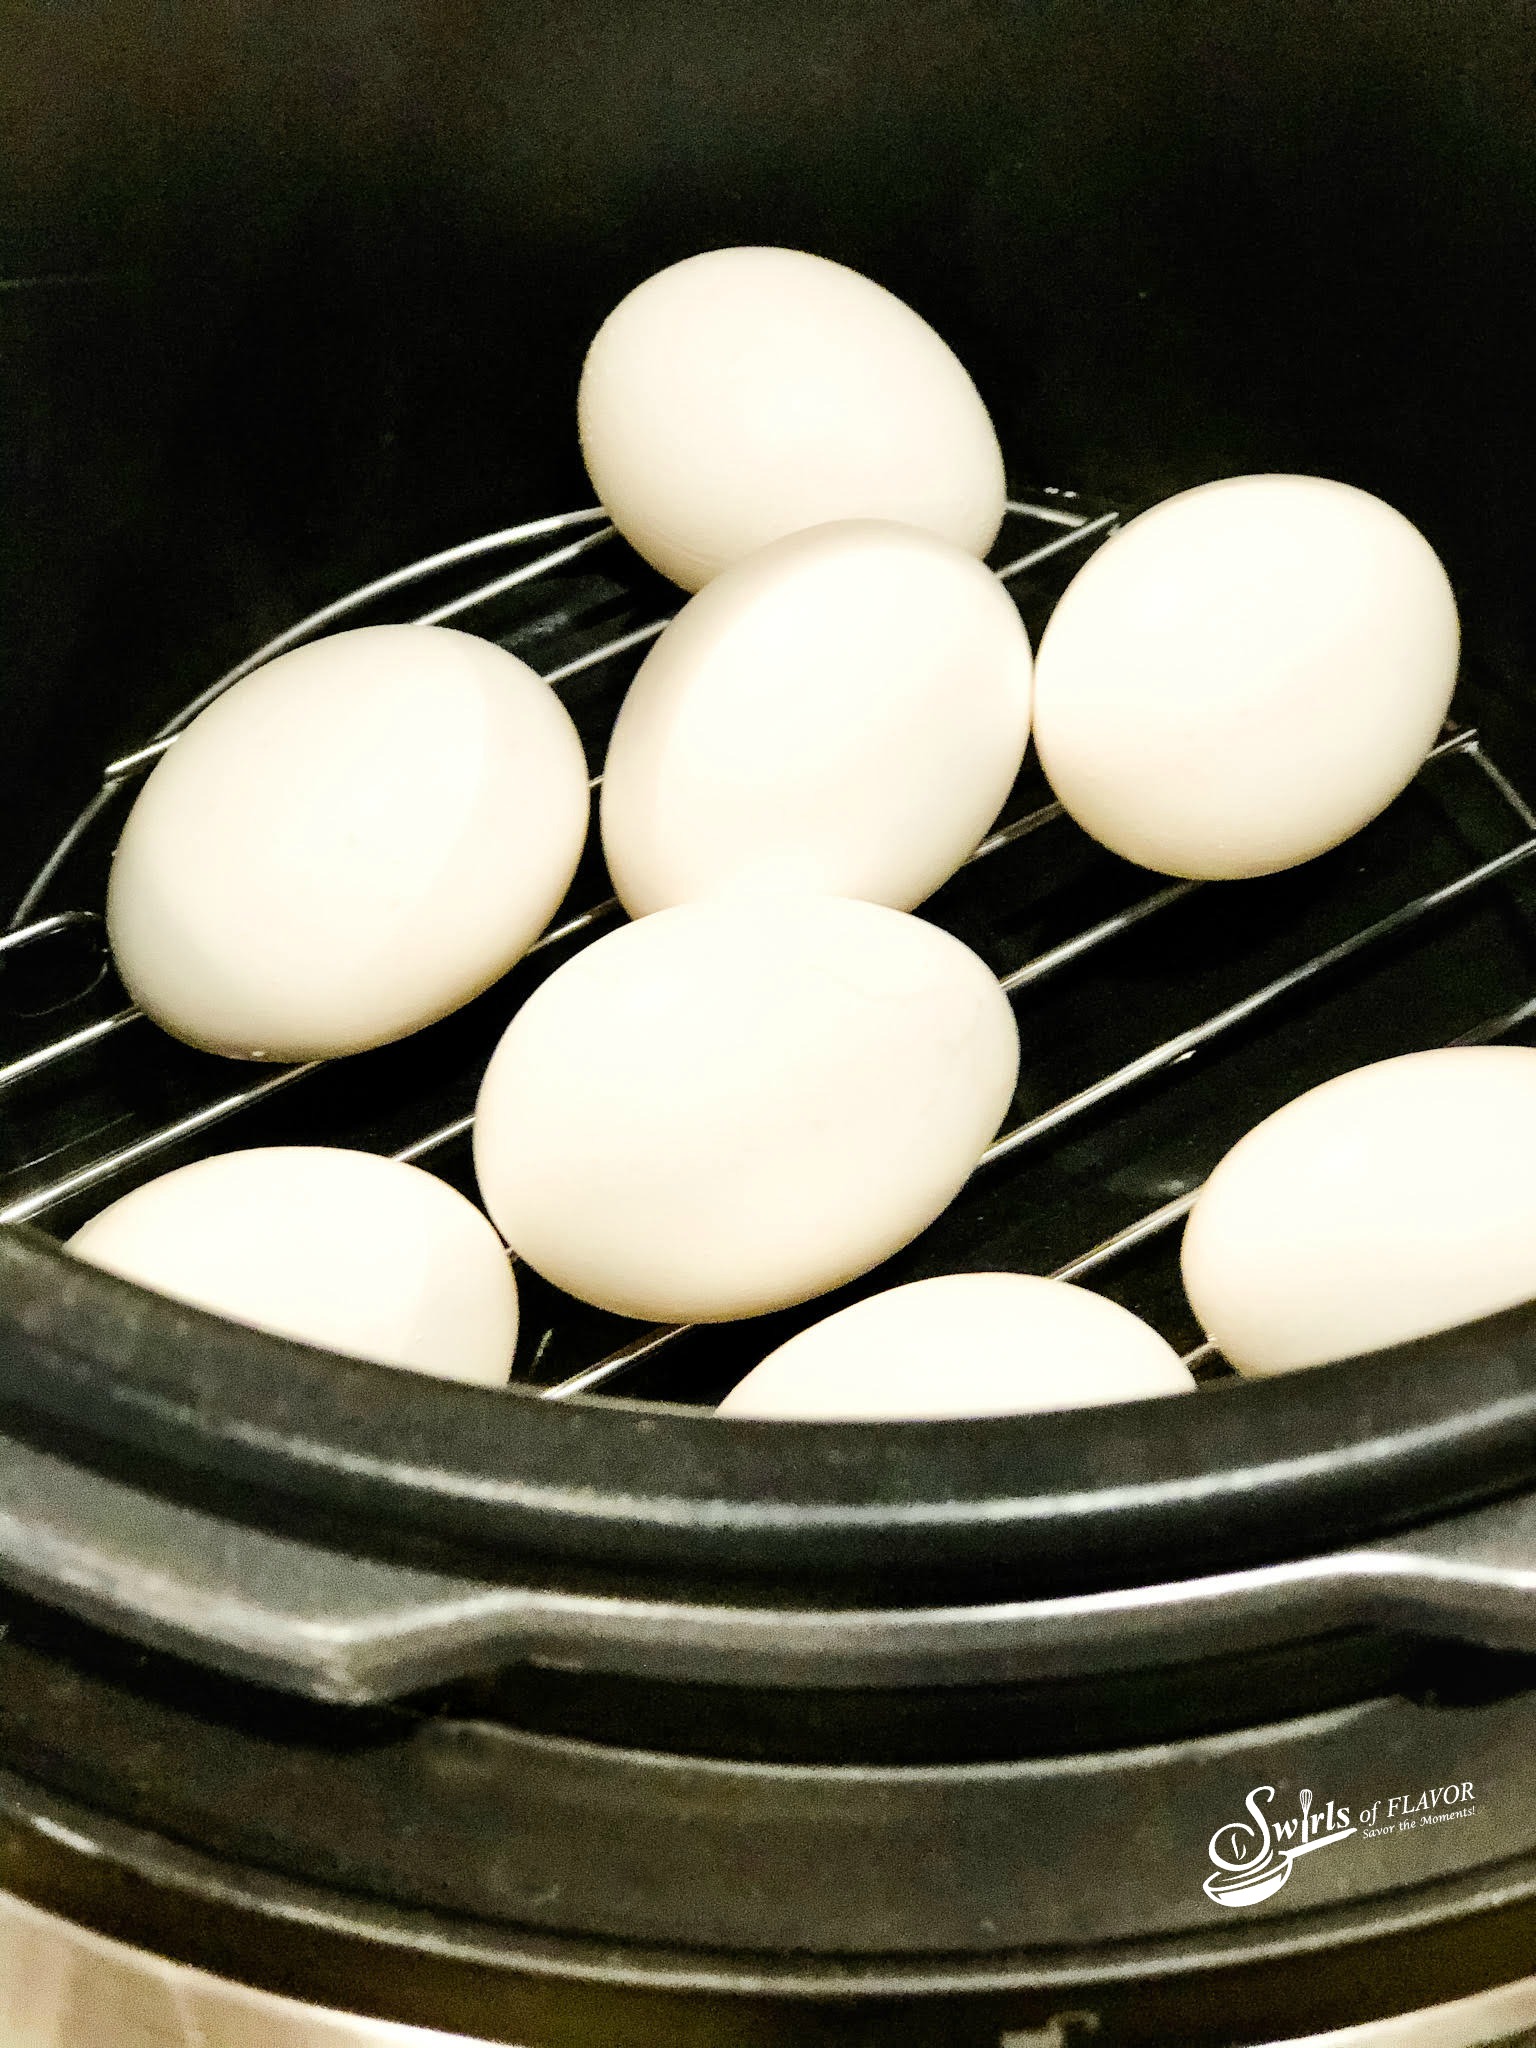 Eggs in the instant pot